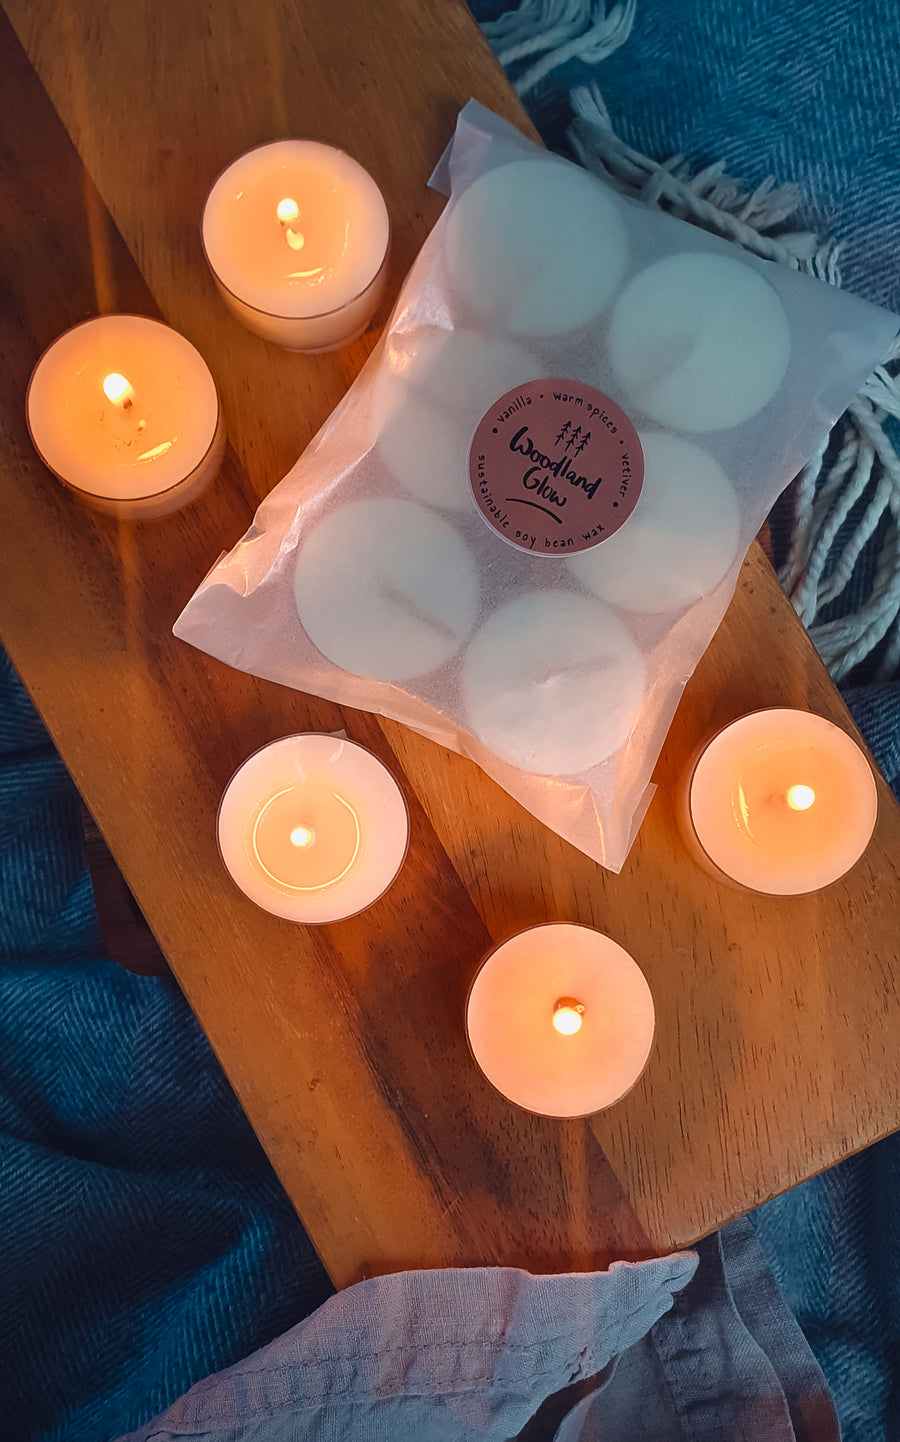 6 woodland glow scented soy wax tealights  with biodegradable packaging. Very sustainable. 